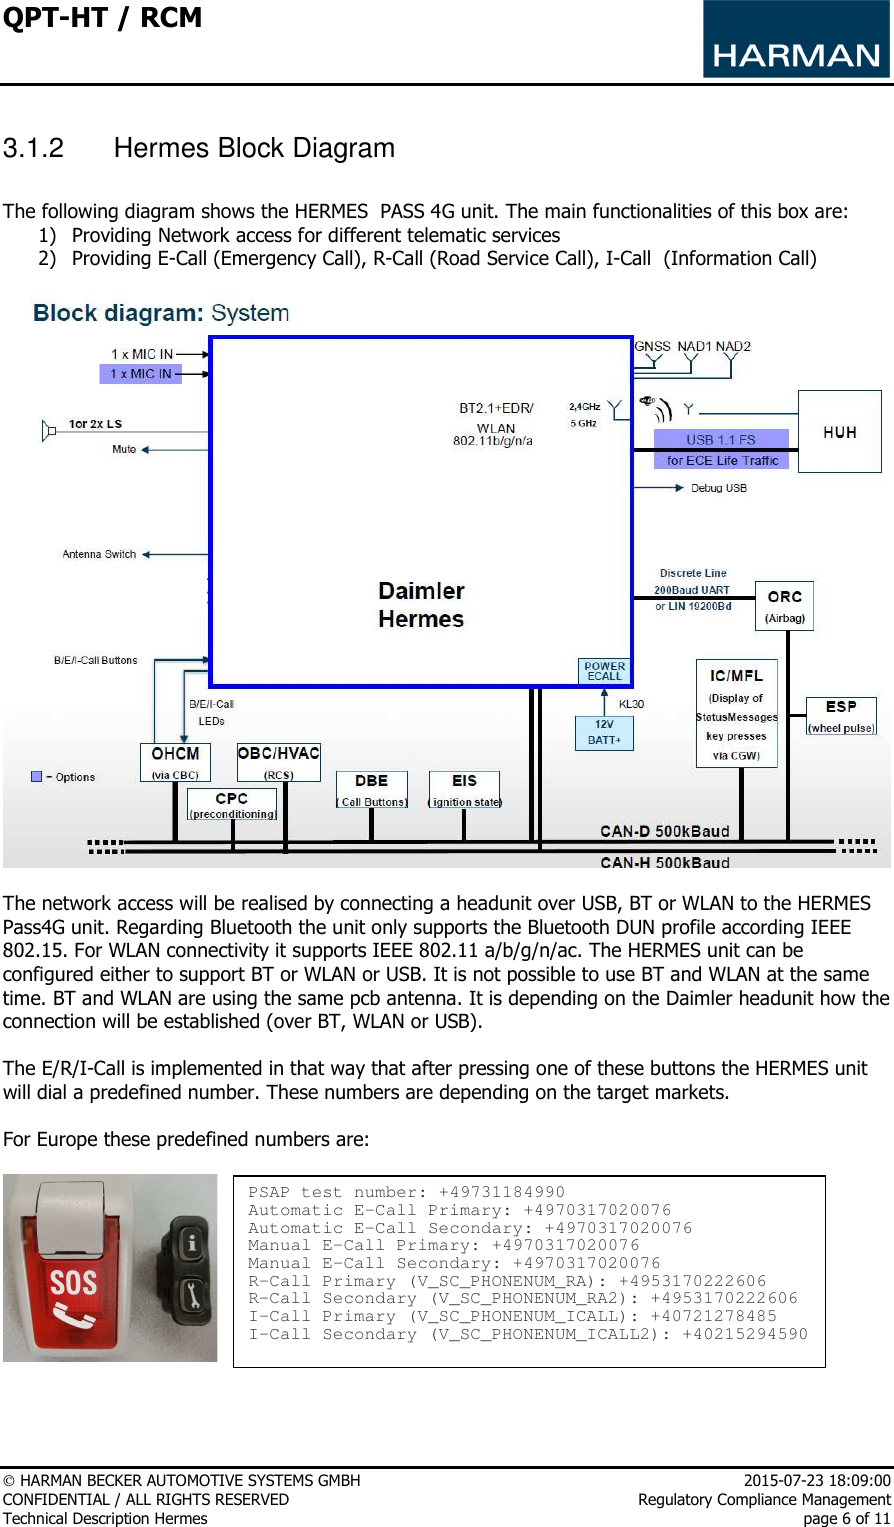 QPT-HT / RCM      HARMAN BECKER AUTOMOTIVE SYSTEMS GMBH    2015-07-23 18:09:00 CONFIDENTIAL / ALL RIGHTS RESERVED     Regulatory Compliance Management Technical Description Hermes    page 6 of 11  3.1.2  Hermes Block Diagram   The following diagram shows the HERMES  PASS 4G unit. The main functionalities of this box are: 1) Providing Network access for different telematic services 2) Providing E-Call (Emergency Call), R-Call (Road Service Call), I-Call  (Information Call)    The network access will be realised by connecting a headunit over USB, BT or WLAN to the HERMES Pass4G unit. Regarding Bluetooth the unit only supports the Bluetooth DUN profile according IEEE 802.15. For WLAN connectivity it supports IEEE 802.11 a/b/g/n/ac. The HERMES unit can be configured either to support BT or WLAN or USB. It is not possible to use BT and WLAN at the same time. BT and WLAN are using the same pcb antenna. It is depending on the Daimler headunit how the connection will be established (over BT, WLAN or USB).   The E/R/I-Call is implemented in that way that after pressing one of these buttons the HERMES unit will dial a predefined number. These numbers are depending on the target markets.   For Europe these predefined numbers are:       PSAP test number: +49731184990 Automatic E-Call Primary: +4970317020076 Automatic E-Call Secondary: +4970317020076 Manual E-Call Primary: +4970317020076 Manual E-Call Secondary: +4970317020076 R-Call Primary (V_SC_PHONENUM_RA): +4953170222606 R-Call Secondary (V_SC_PHONENUM_RA2): +4953170222606 I-Call Primary (V_SC_PHONENUM_ICALL): +40721278485 I-Call Secondary (V_SC_PHONENUM_ICALL2): +40215294590 